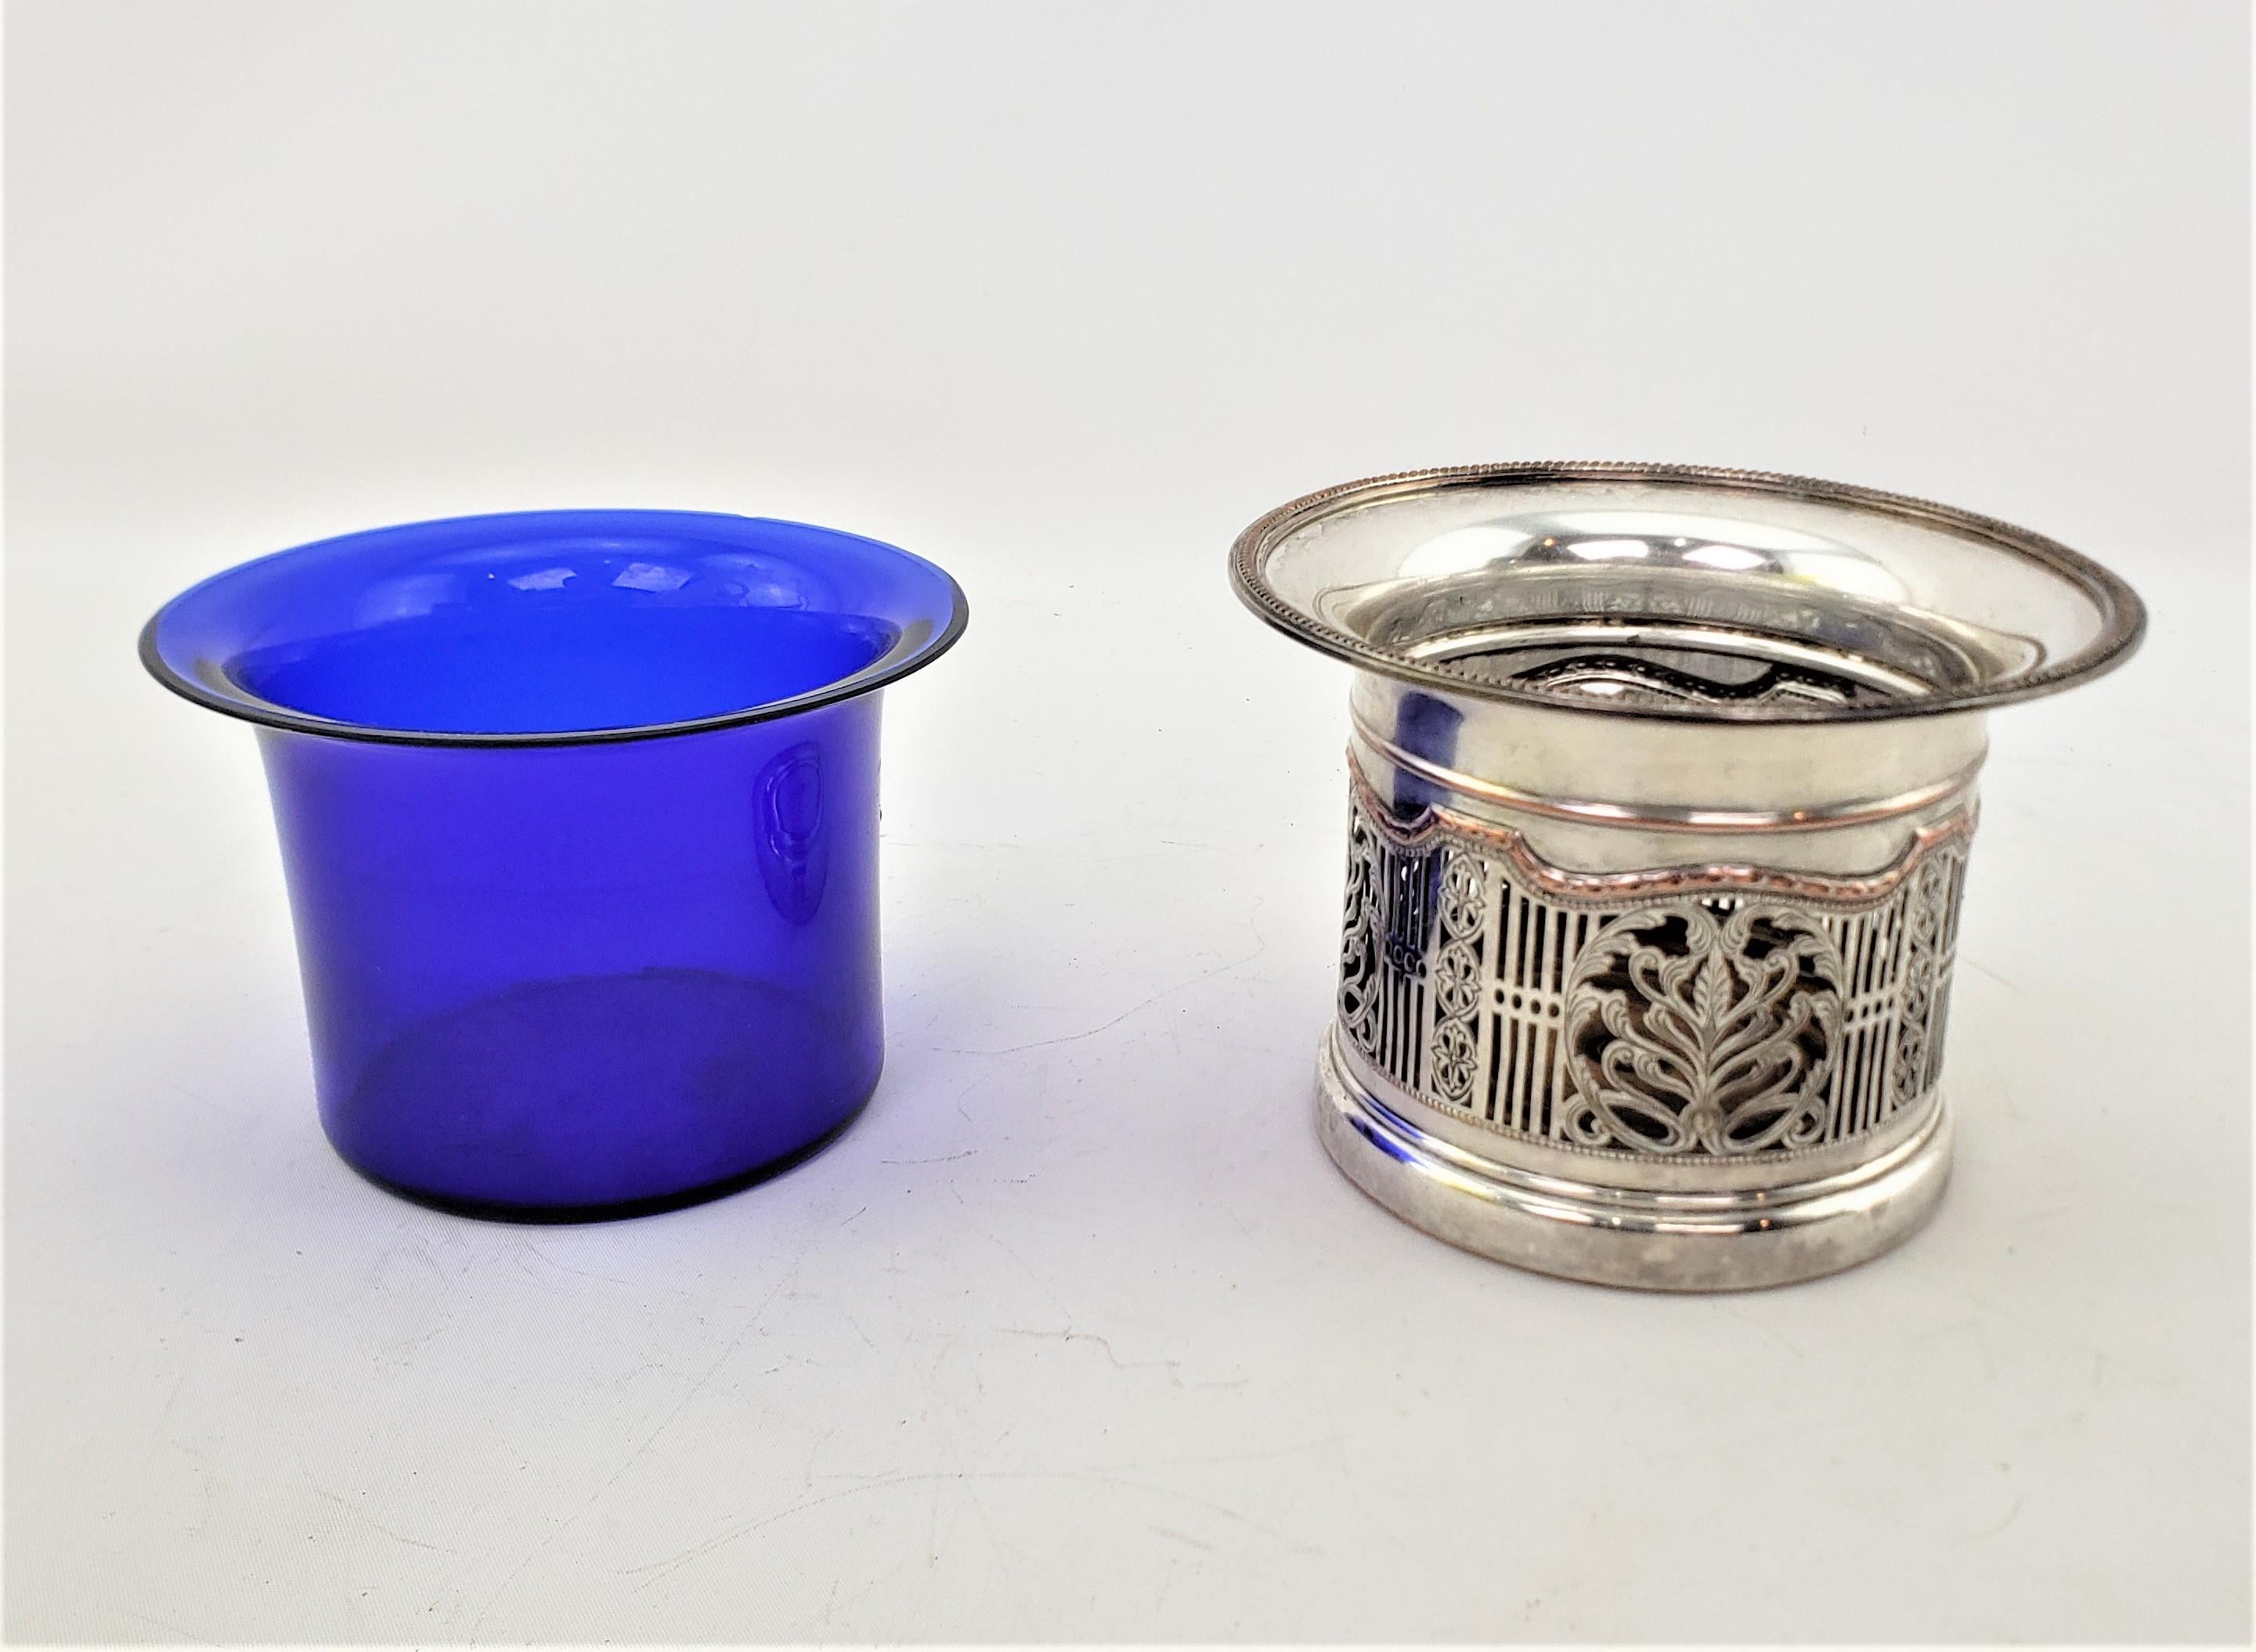 Antique Silver Plated Pierced Bottle Coaster or Chiller with a Cobalt Liner In Good Condition For Sale In Hamilton, Ontario